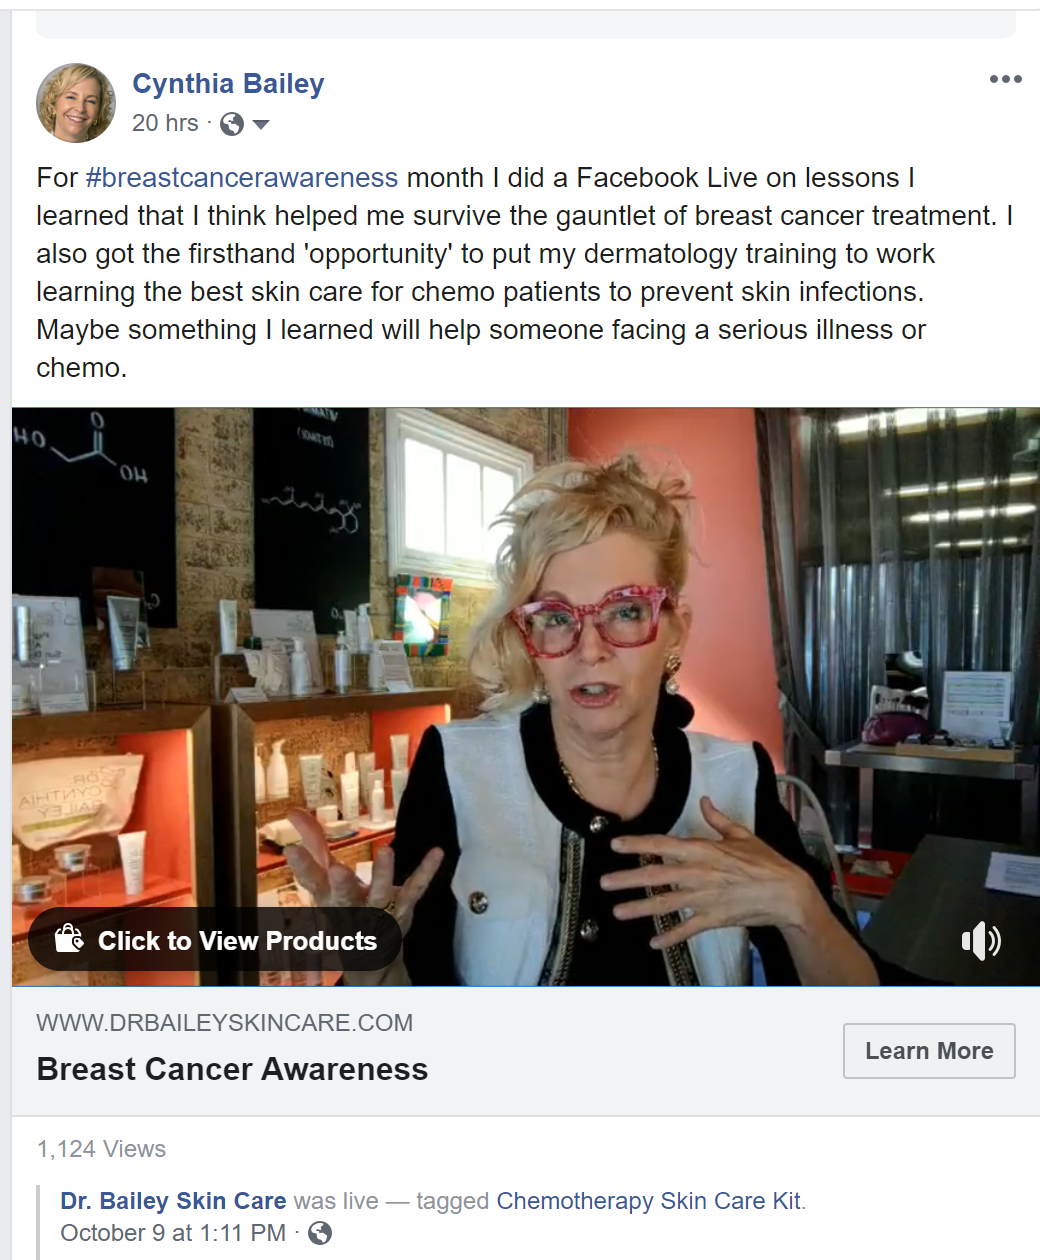 Dermatologist and breast cancer survivor Dr. Bailey's breast cancer story